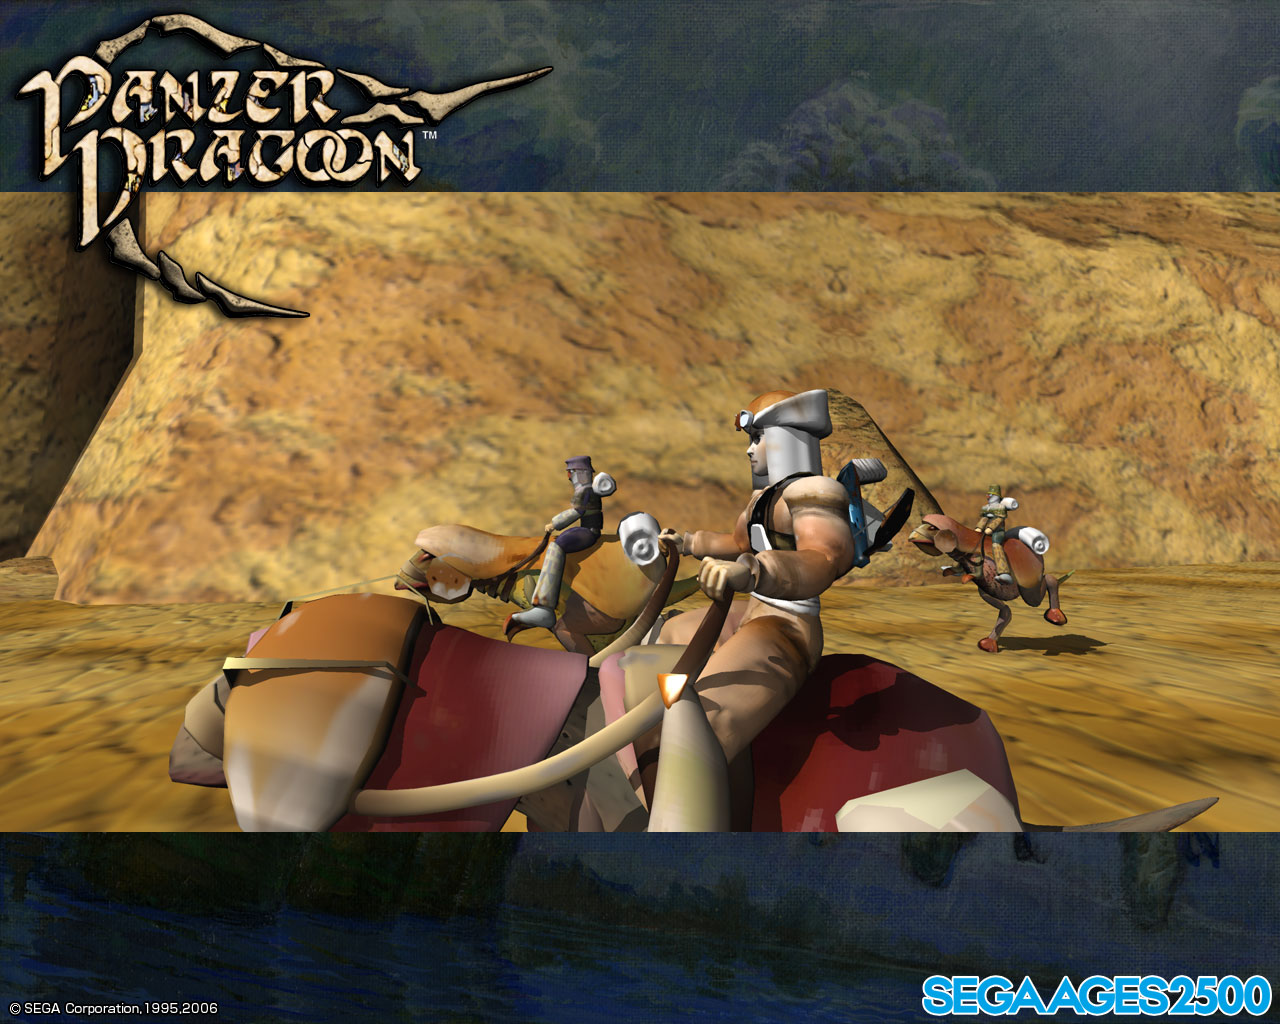 Panzer Dragoon Trilogy Artwork and Wallpapers